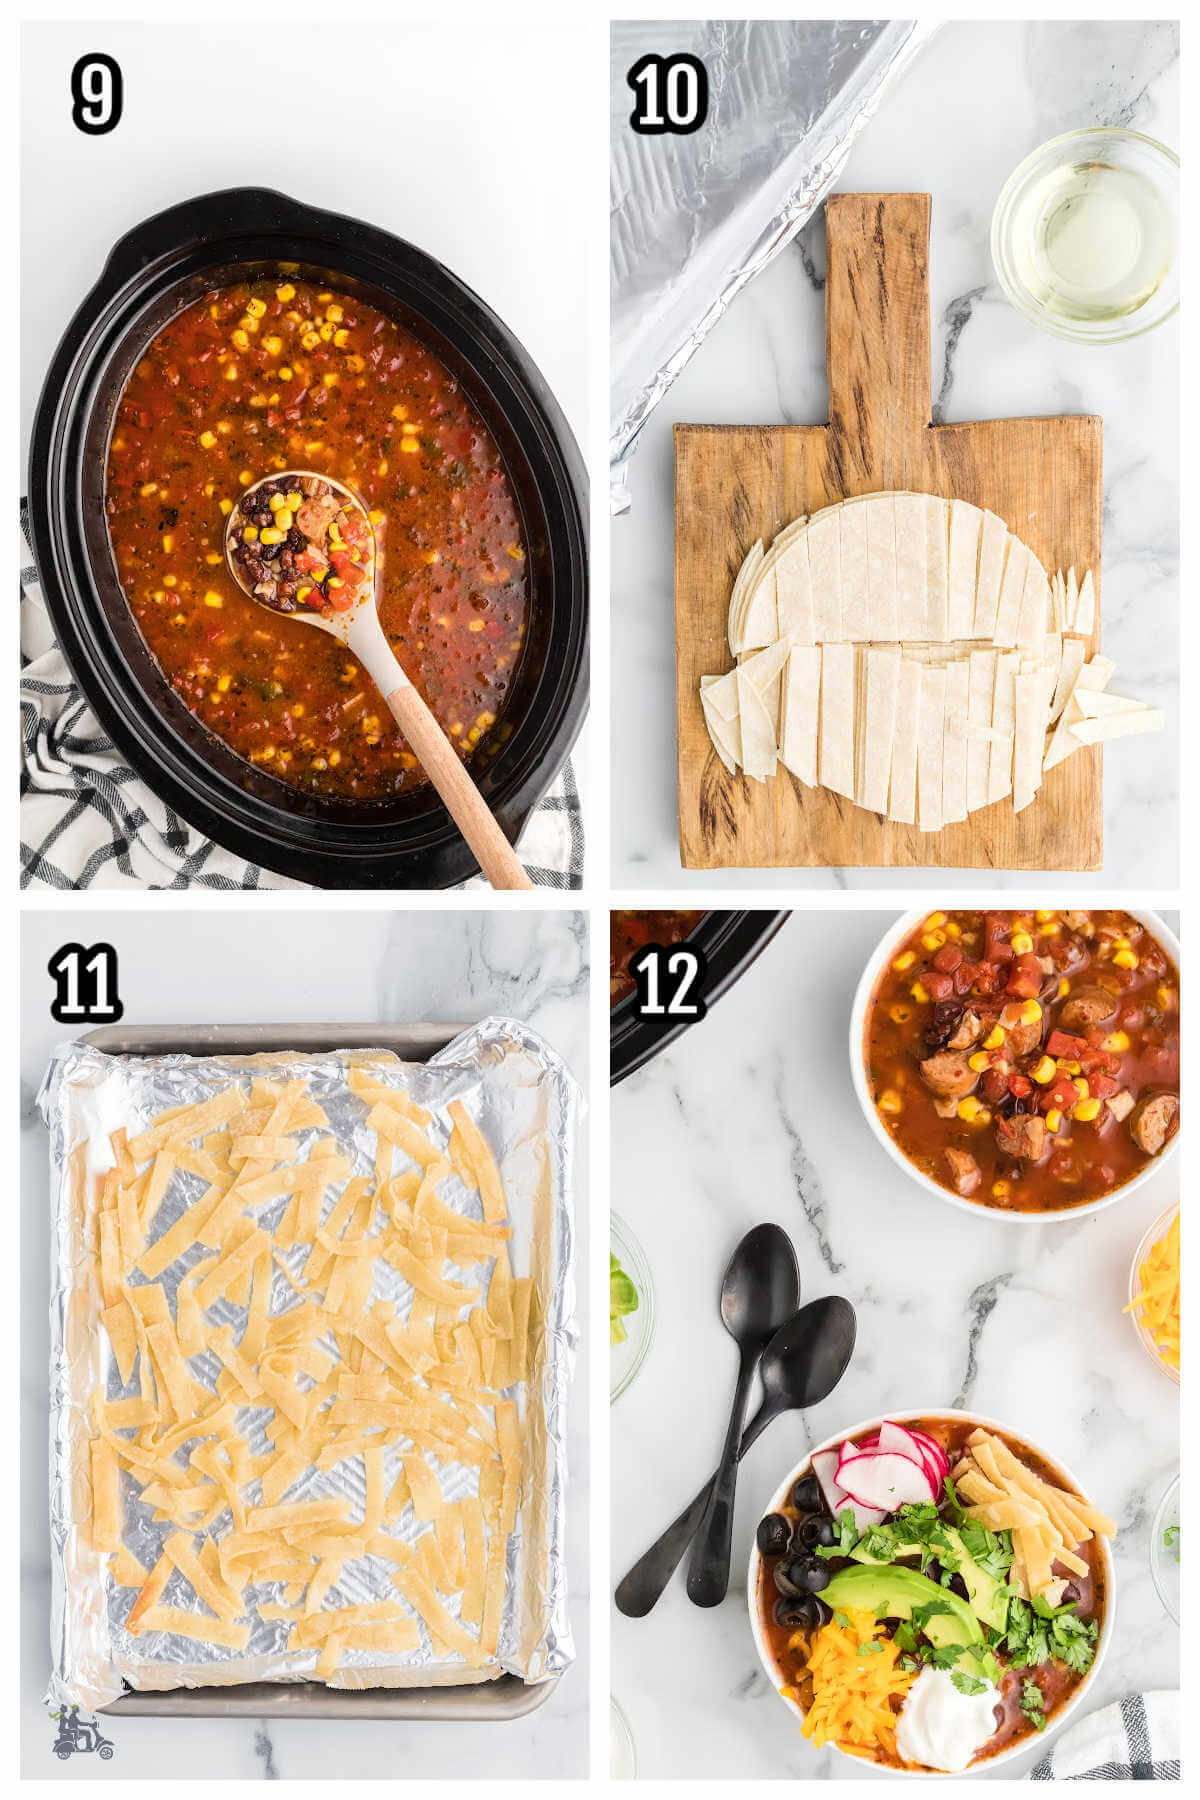 Third and final four steps to cooking the Chili's copycat Southwest chicken Soup with Tortilla chips and other garnishes on top. 